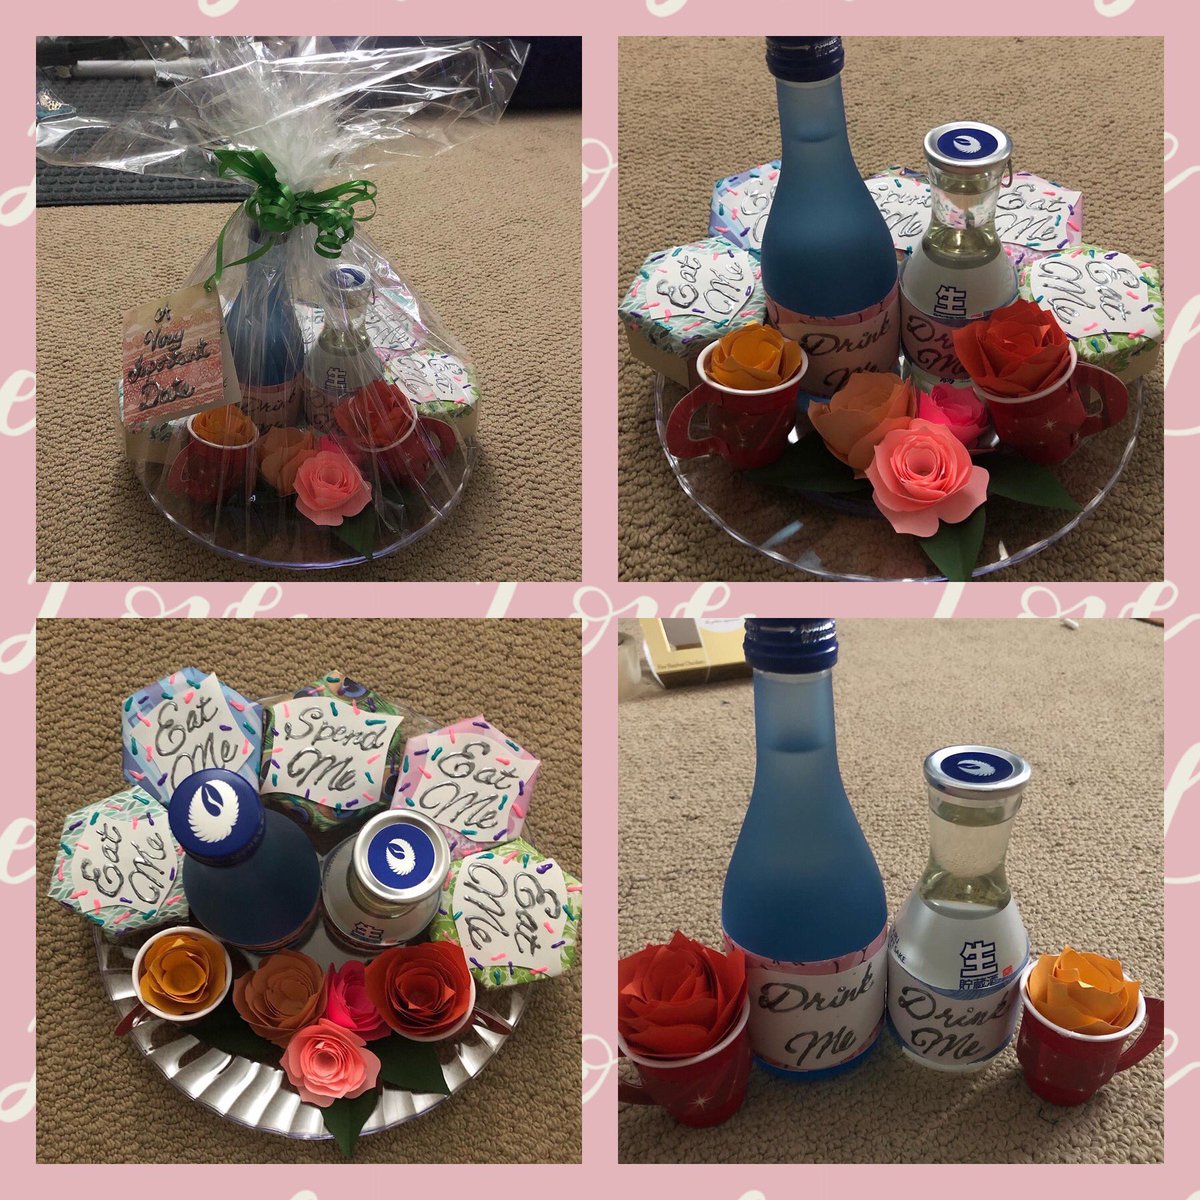 Went to a fun Alice in Wonderland themed bridal shower and wanted to make a fun themed gift. So pleased with how it turned out.

#gift #aliceinwonderland #eatme #drinkme #creativegifts #craft #crafting #crafts #themedgifts